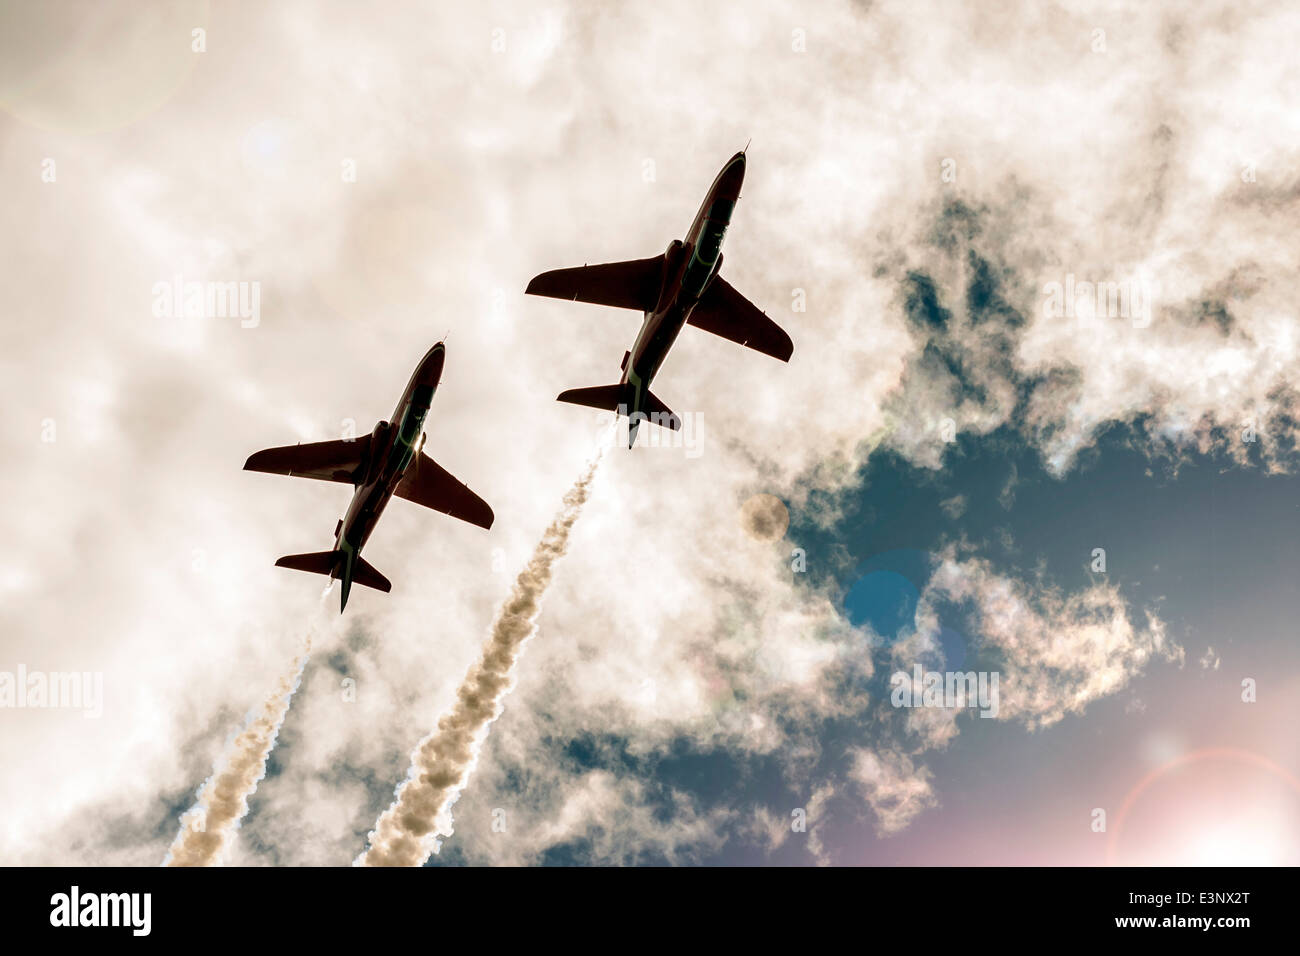 Two fighter jets fly in the cloudy sky, line of exhaust behind them Stock Photo